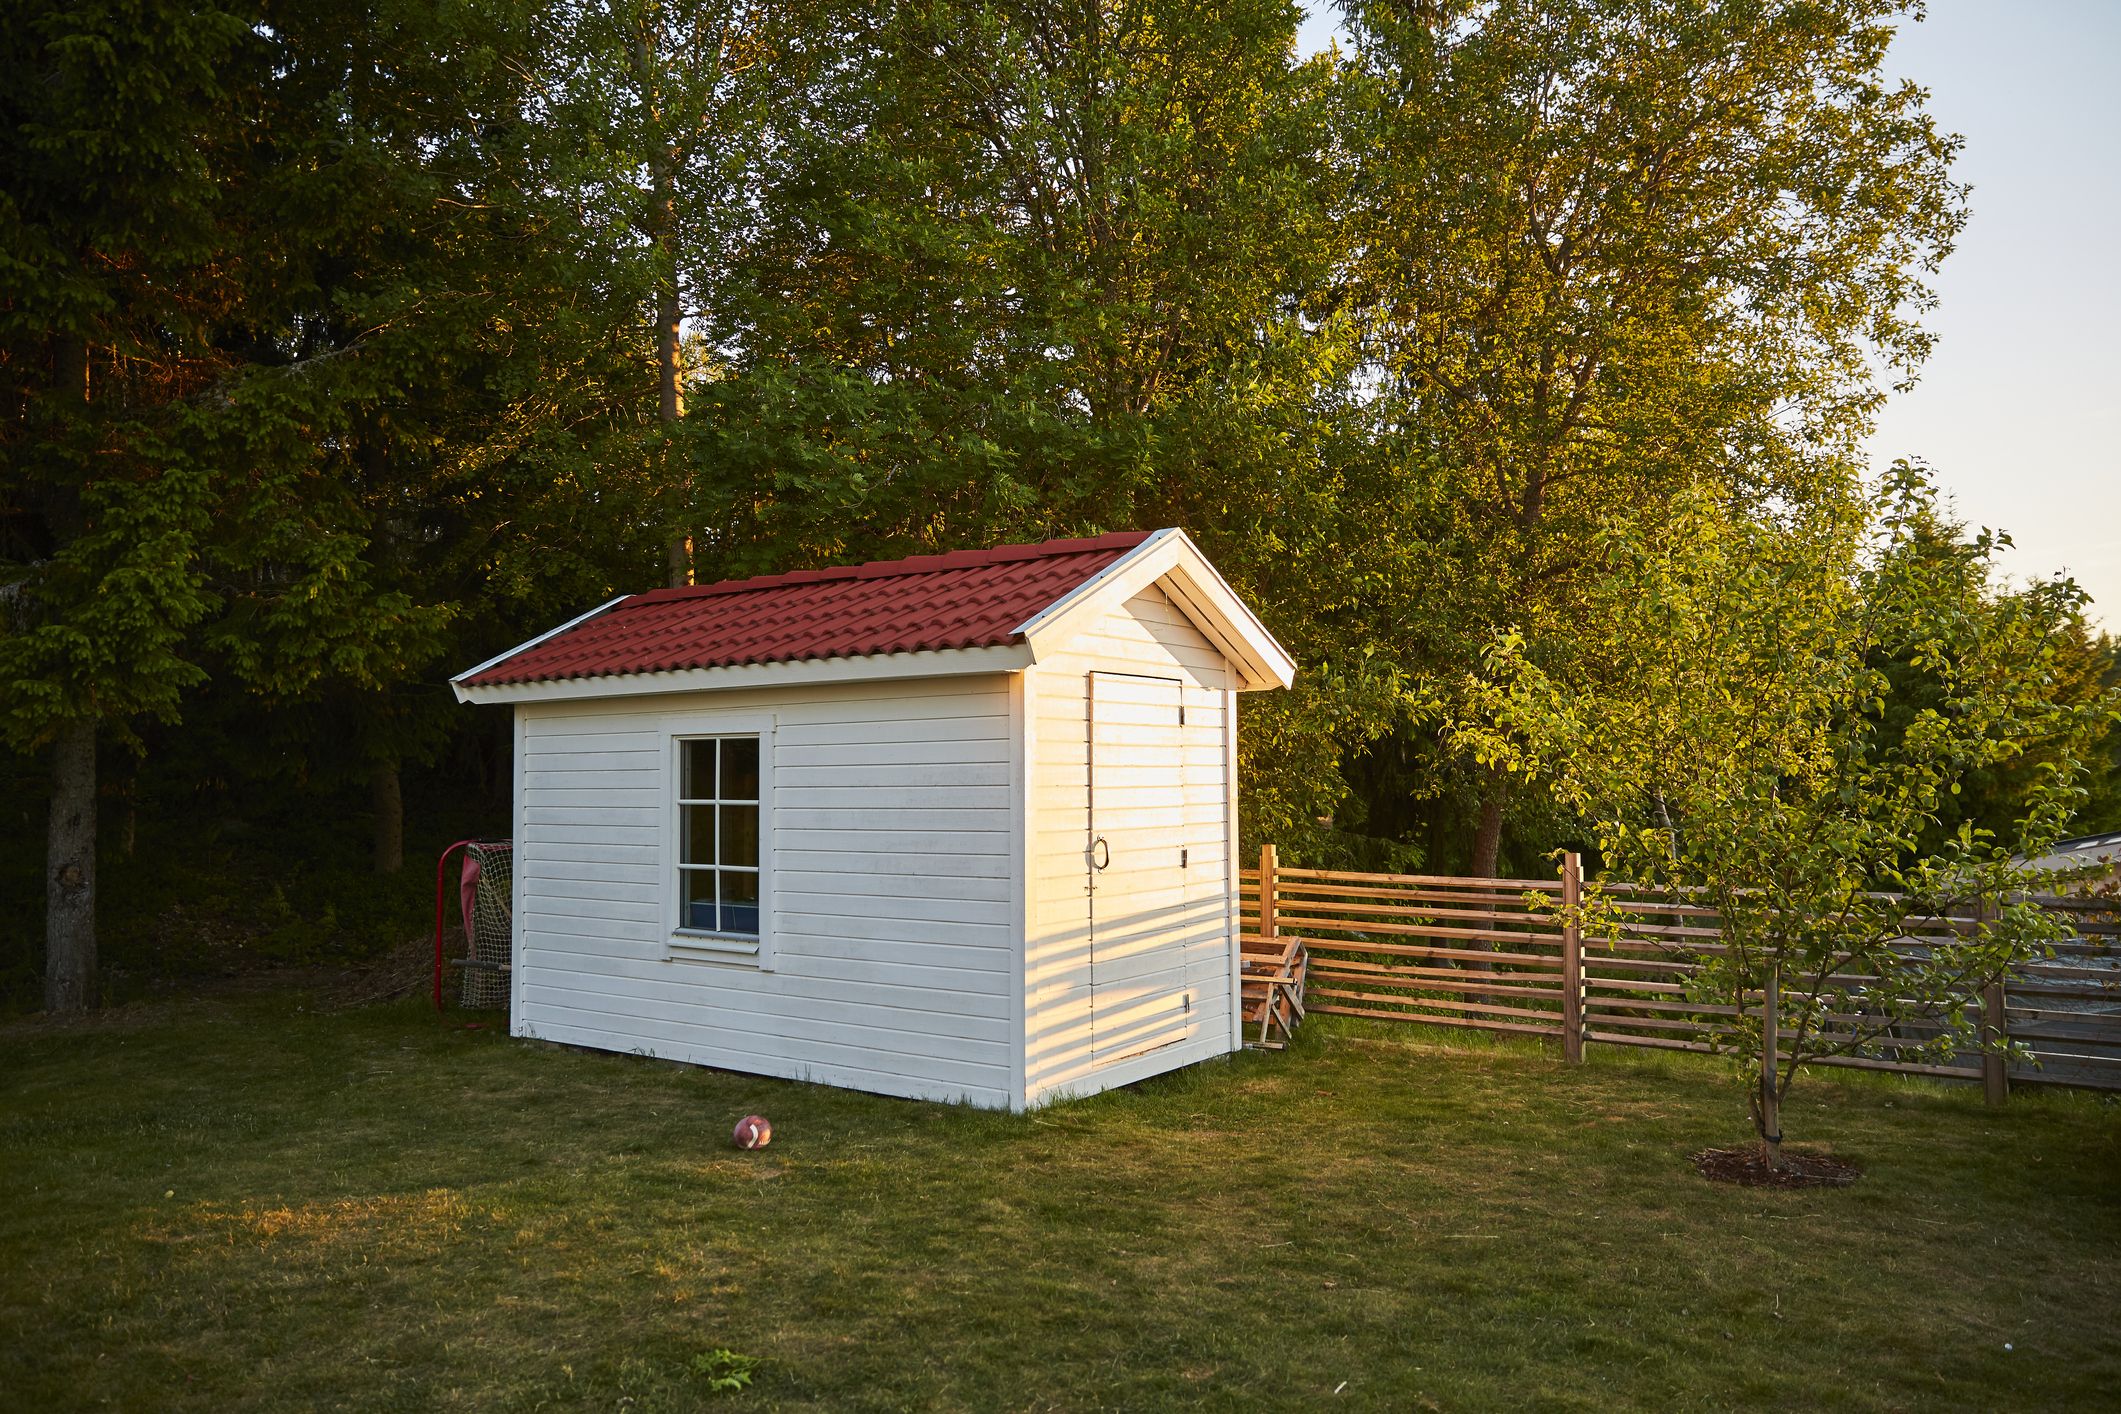 10 Portable Storage Sheds You Should Set Up in Your Backyard